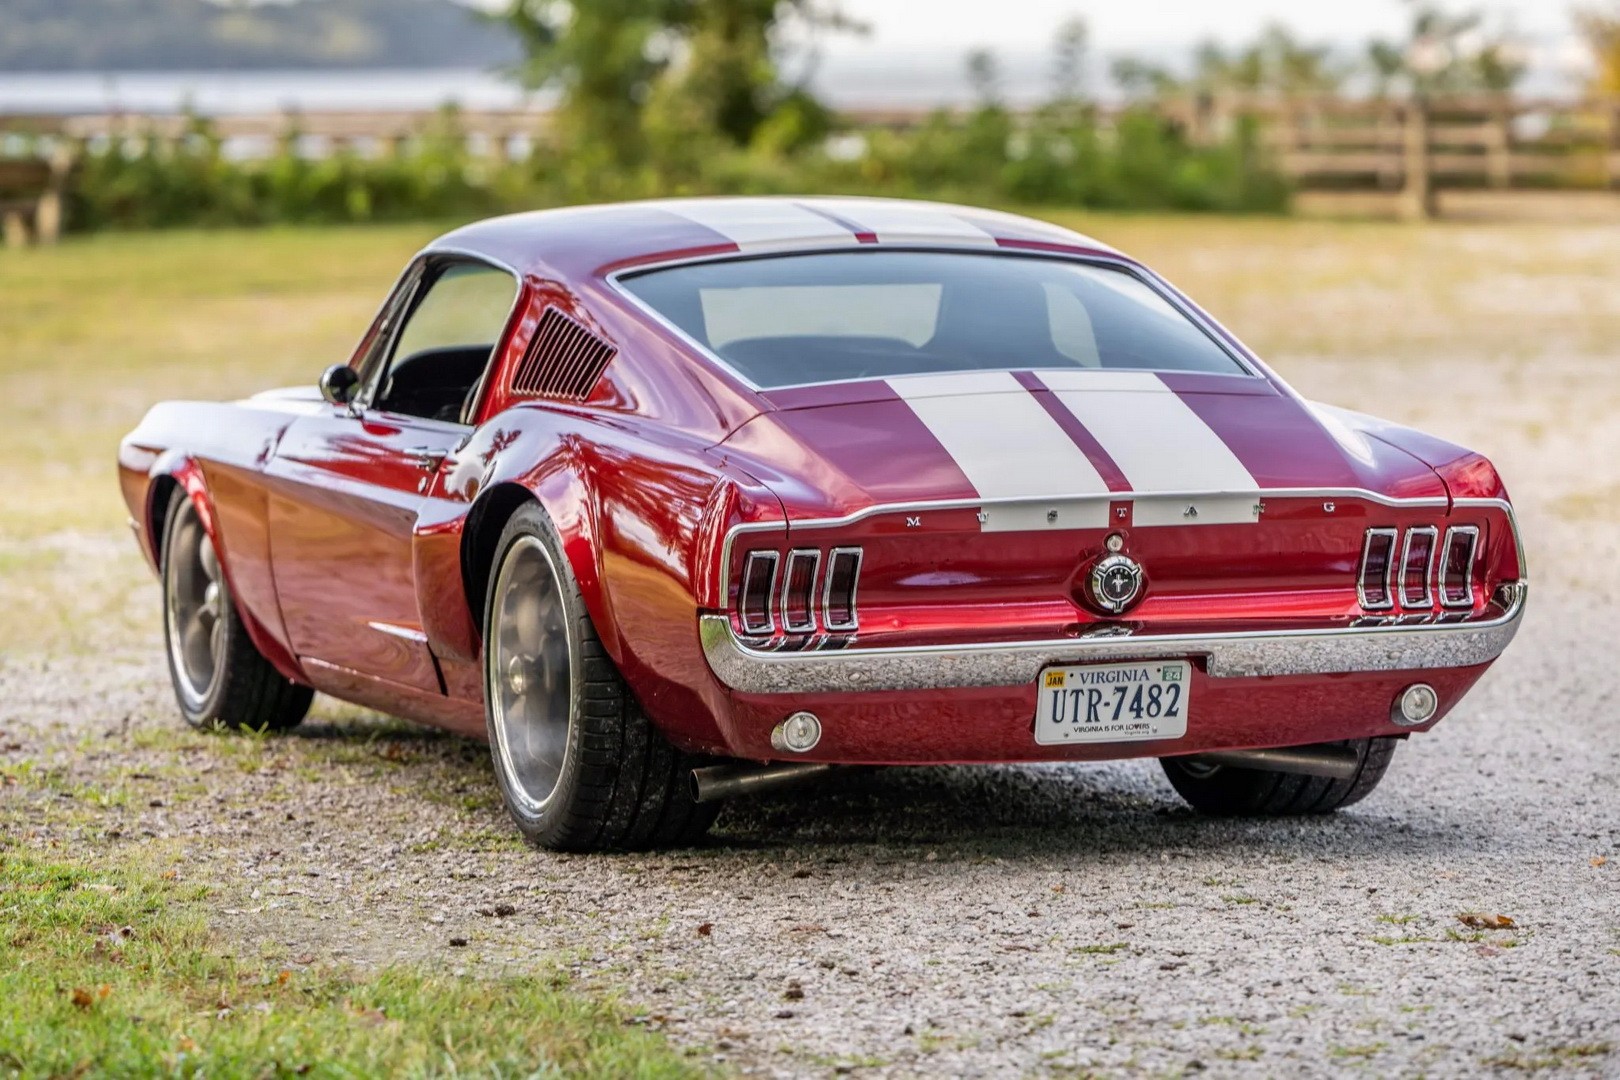 One-of-a-Kind 1967 Ford Mustang Looks Like an Aston Martin V8 Vantage / Ford GT Love Child - autoevolution